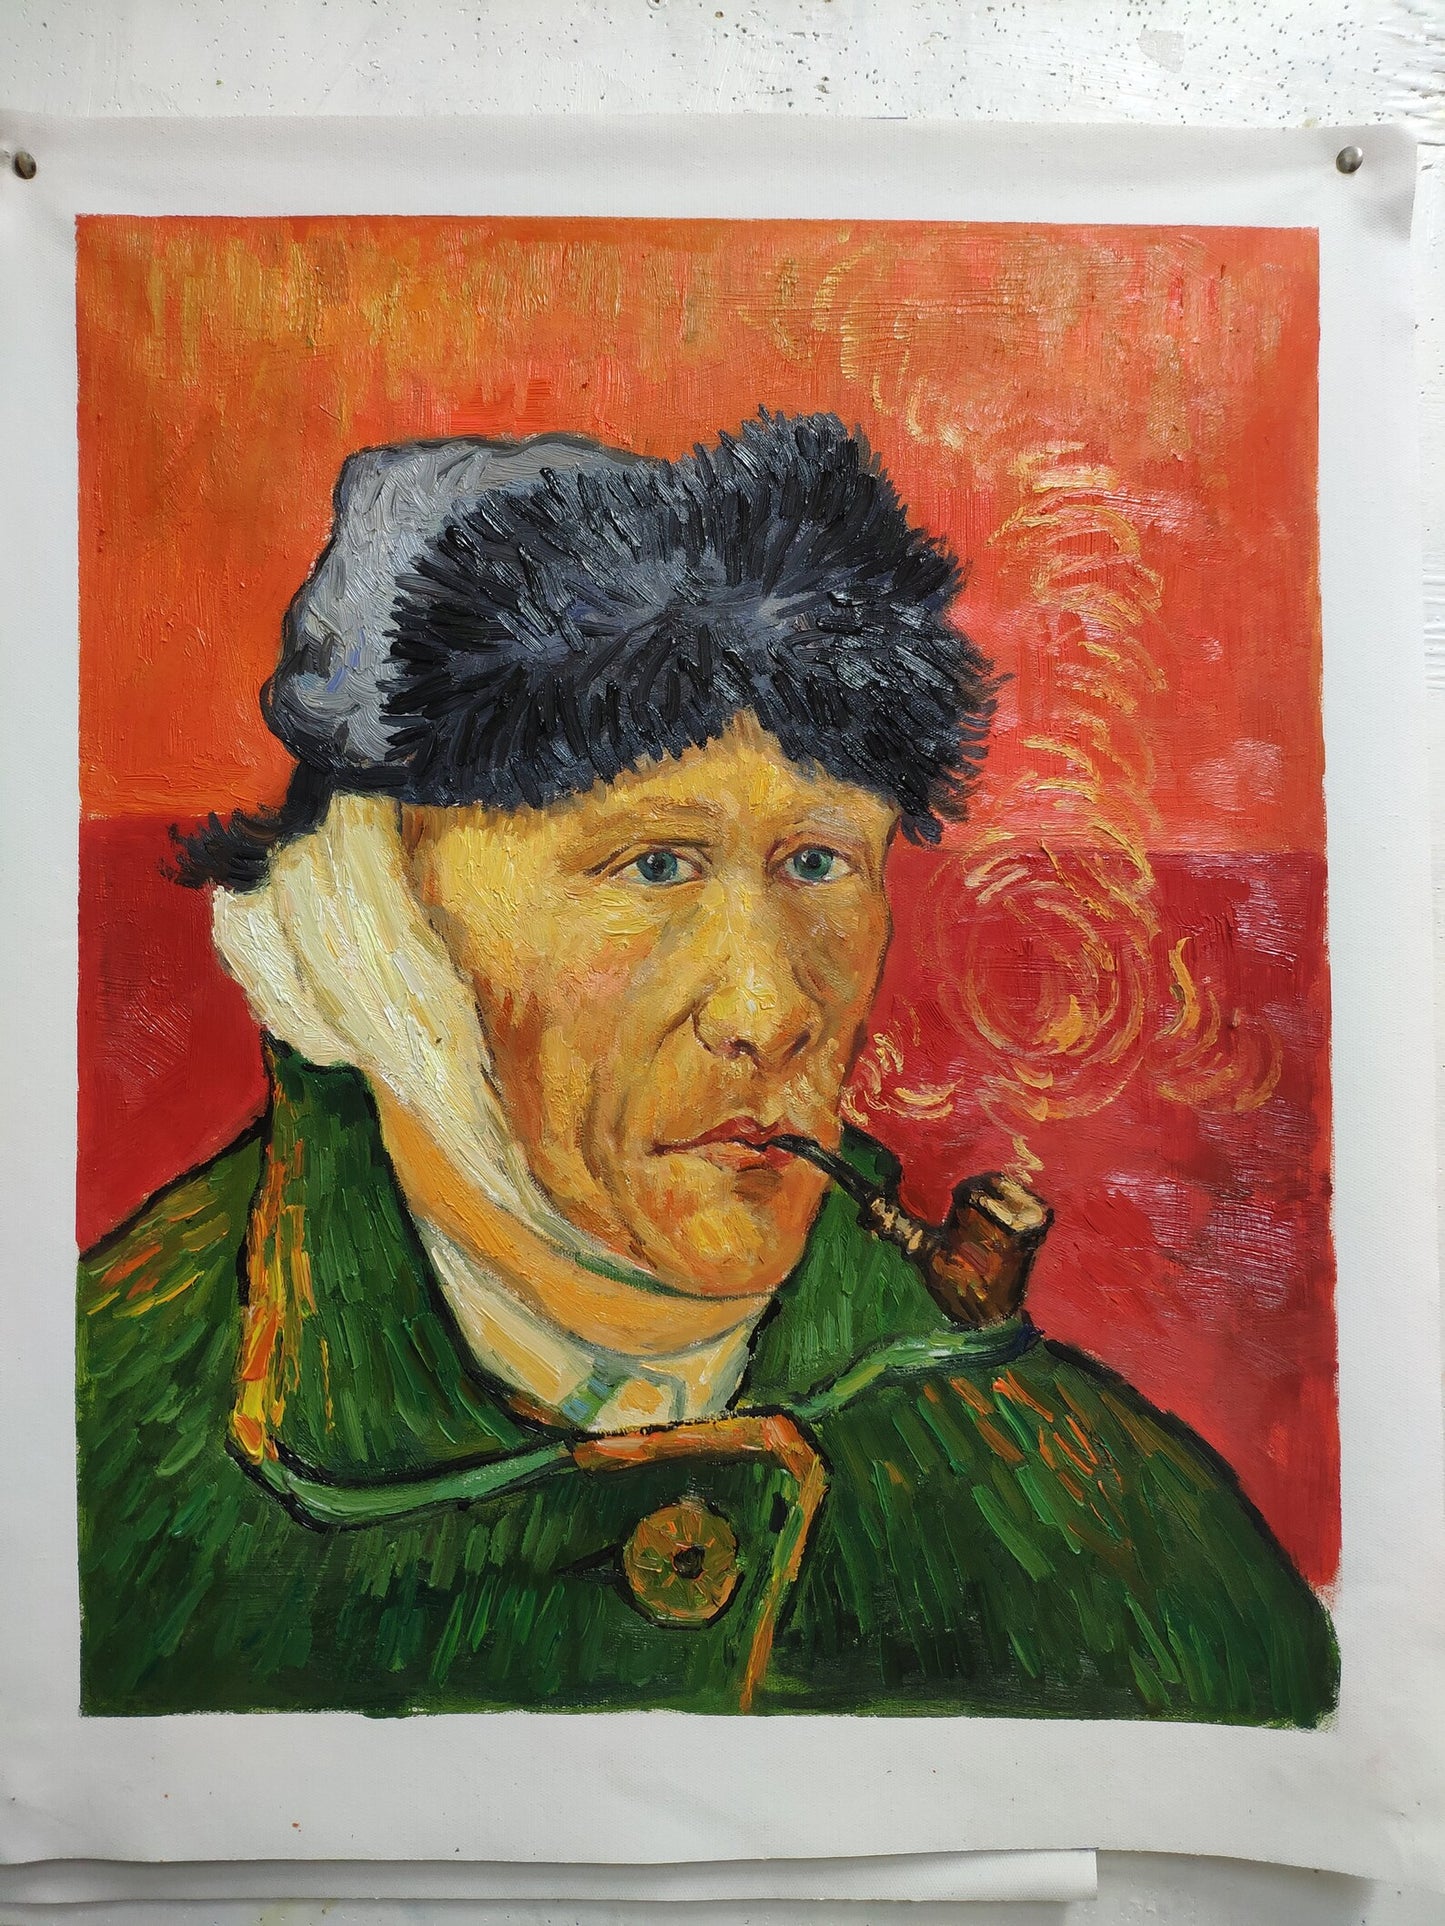 Own a Masterpiece - High Quality Reproduction of van Gogh's 'Self-Portrait' - Pre-Order Now